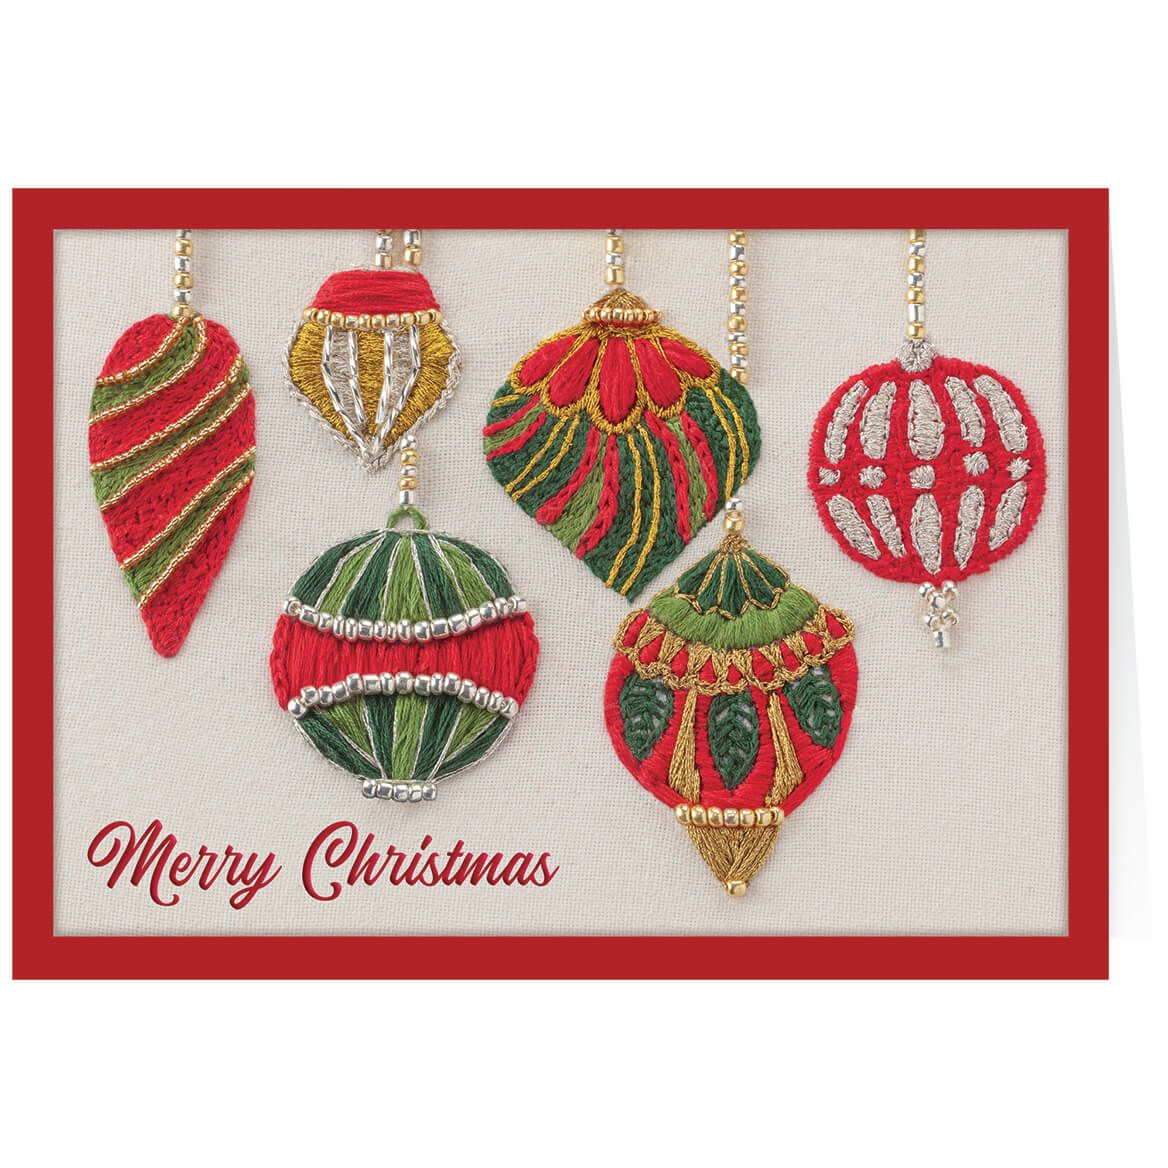 Personalized Festive Embroidered Ornaments Christmas Cards, Set of 20 + '-' + 374977